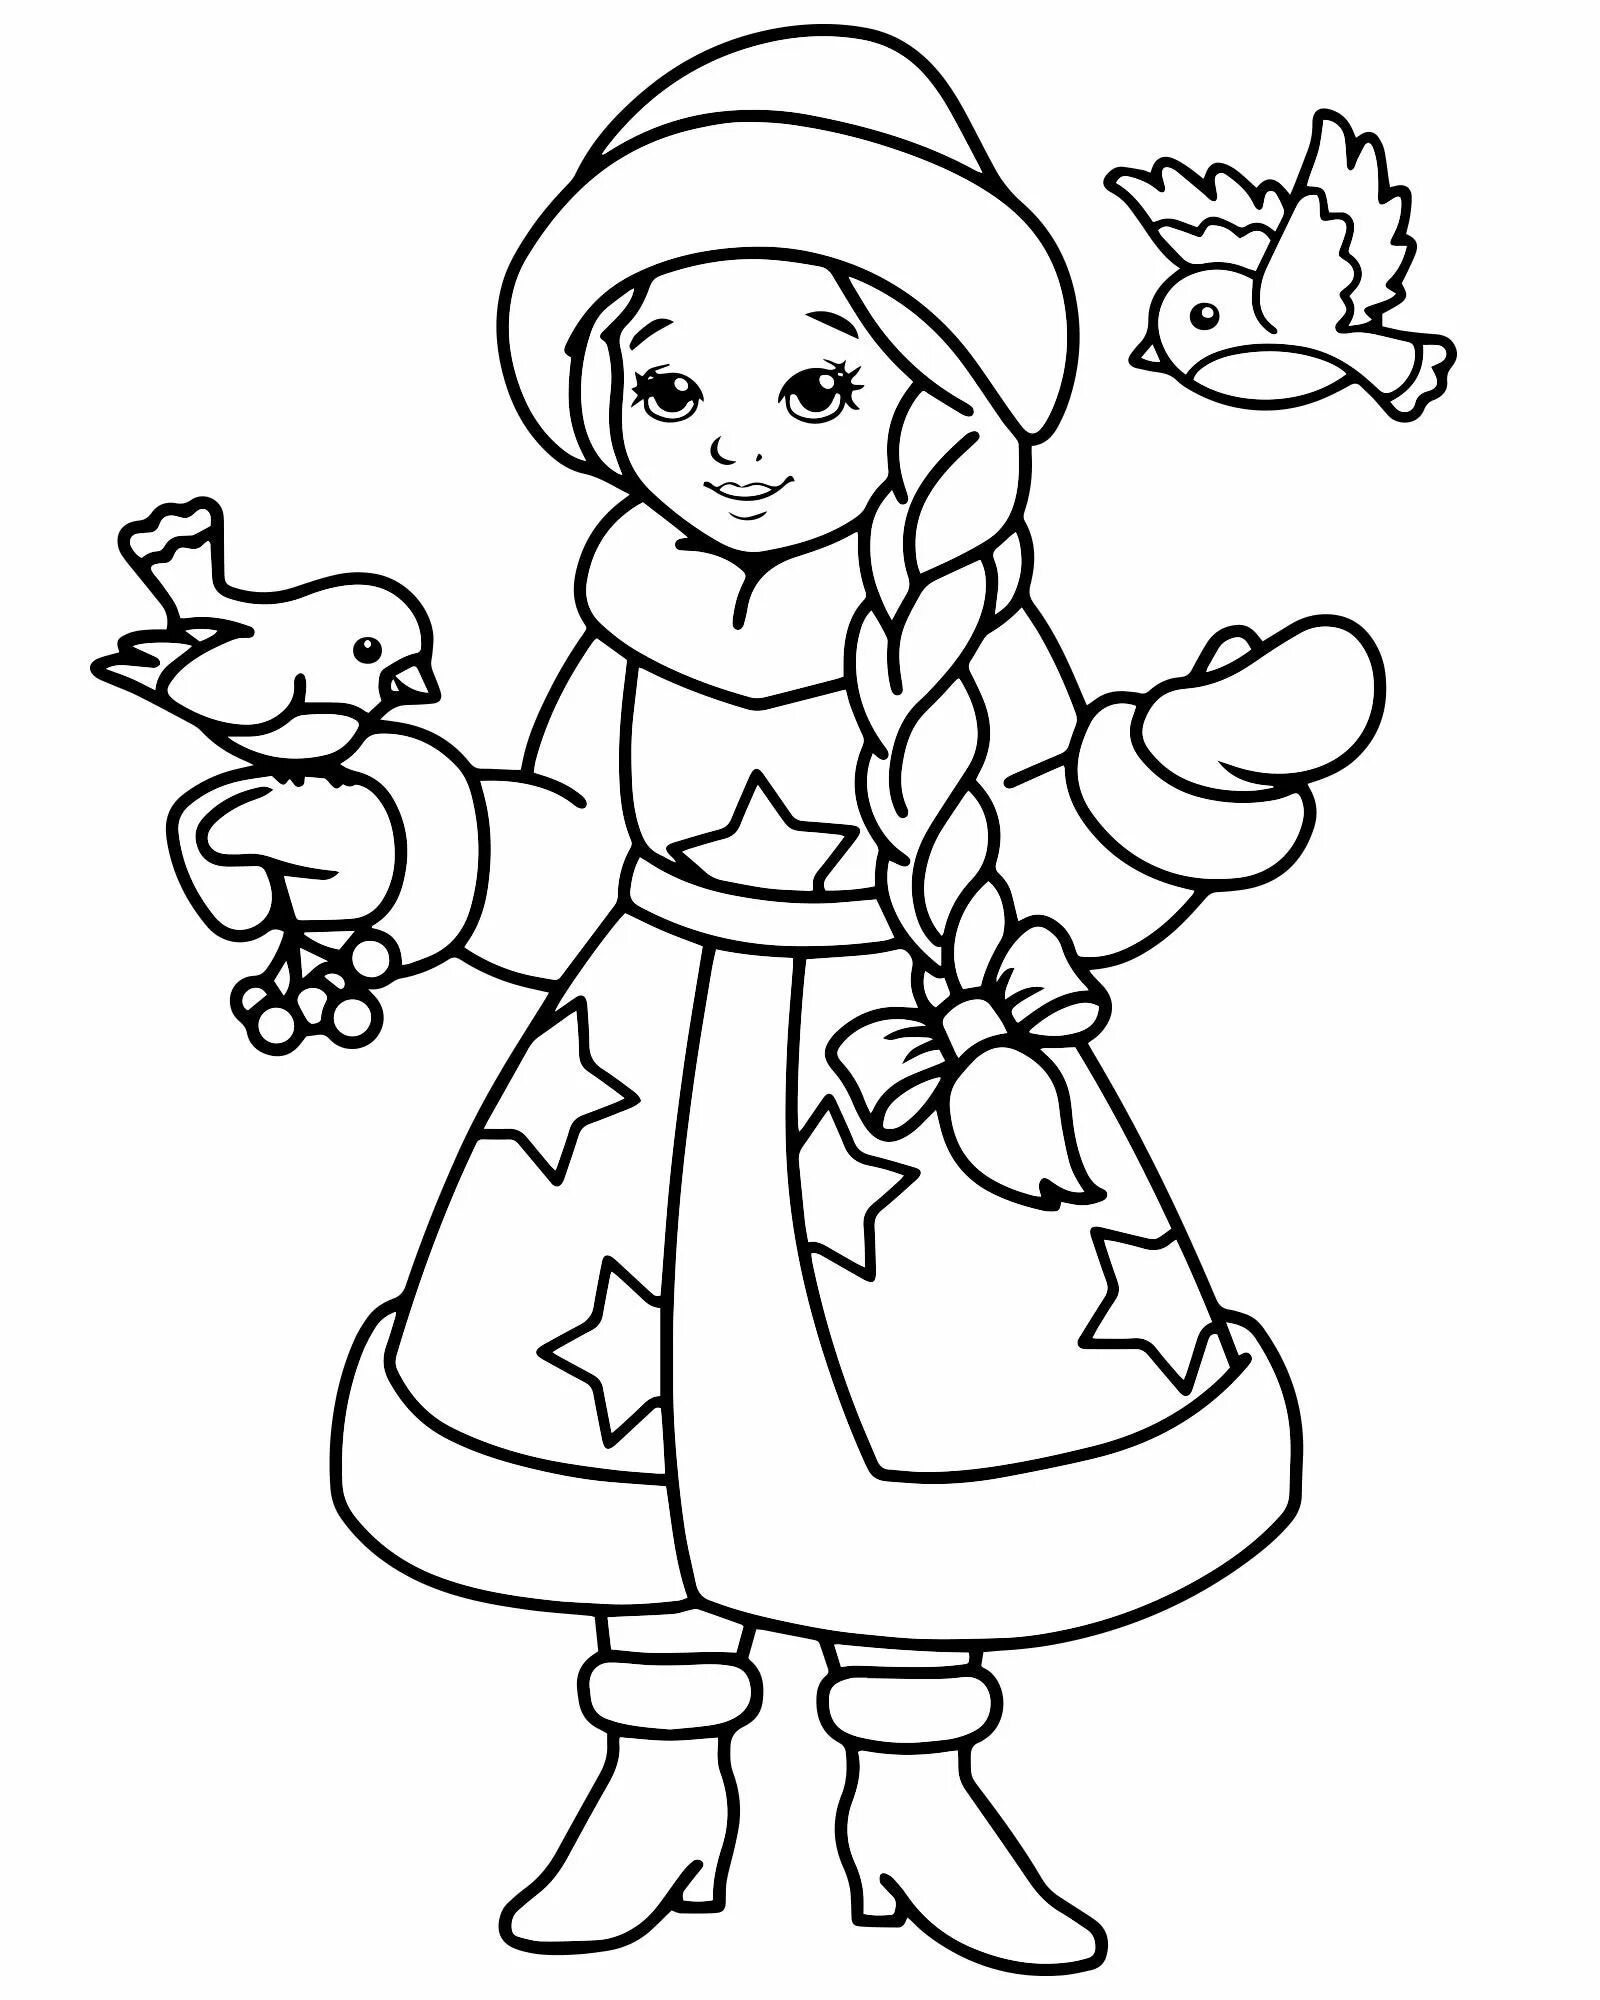 Sparkling snow maiden coloring book for girls